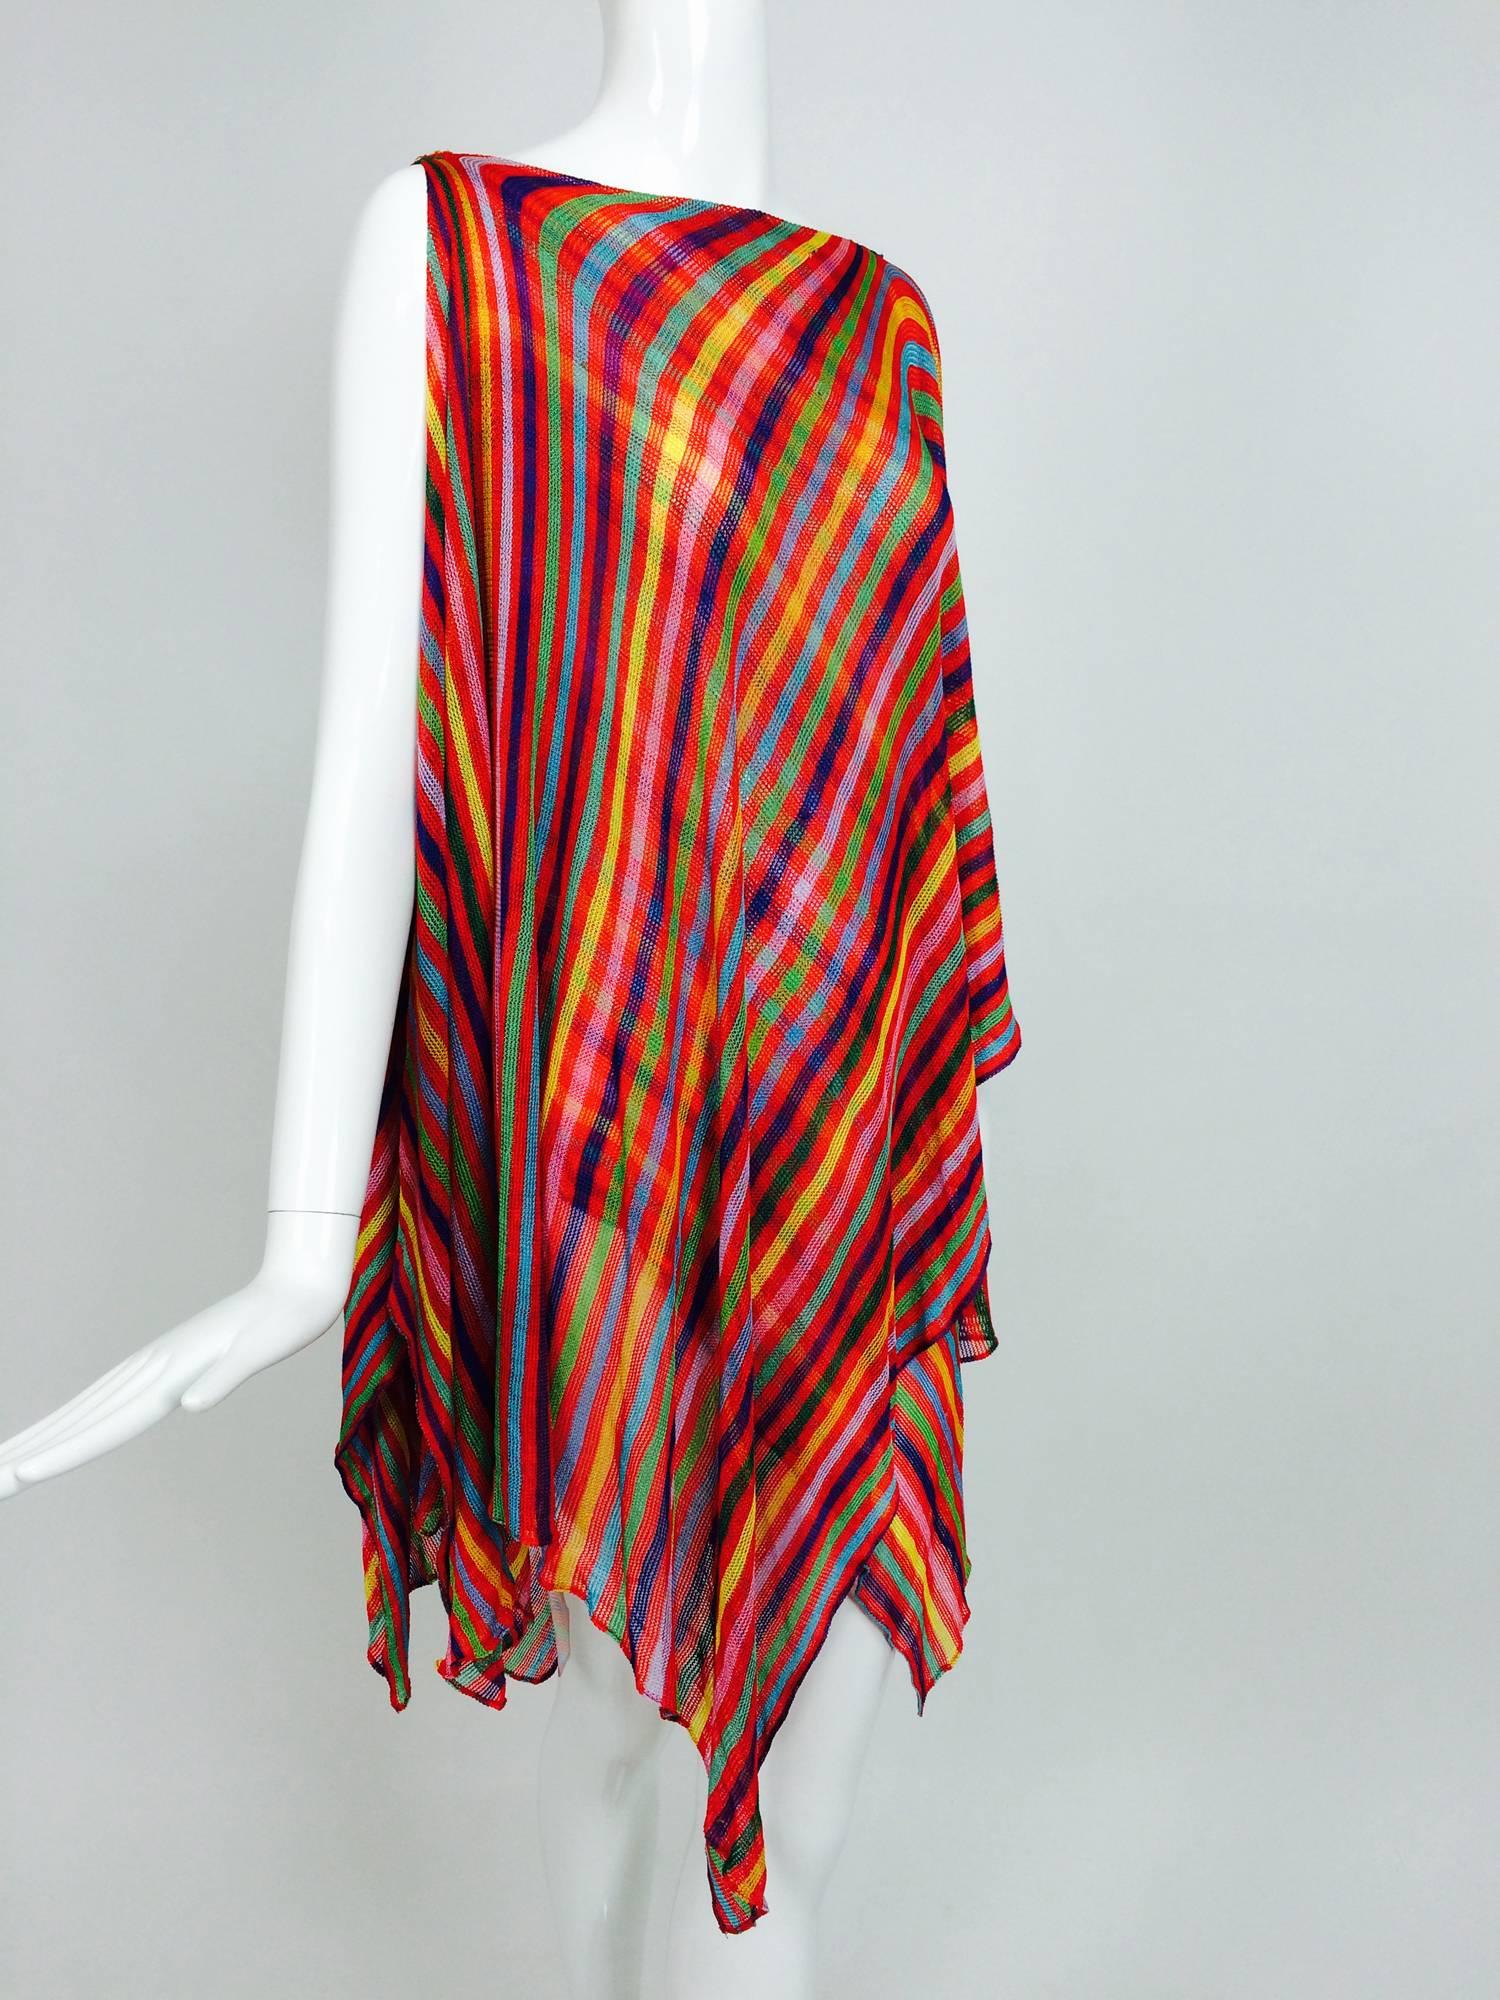 Vintage Missoni draped asymmetrical coloured tunic 1970s...Brightly coloured stripes that form a plaid design when the layers of this tunic drape over each other...Woven of cotton...Bateau neckline and sleeveless it is a perfect warm weather fashion